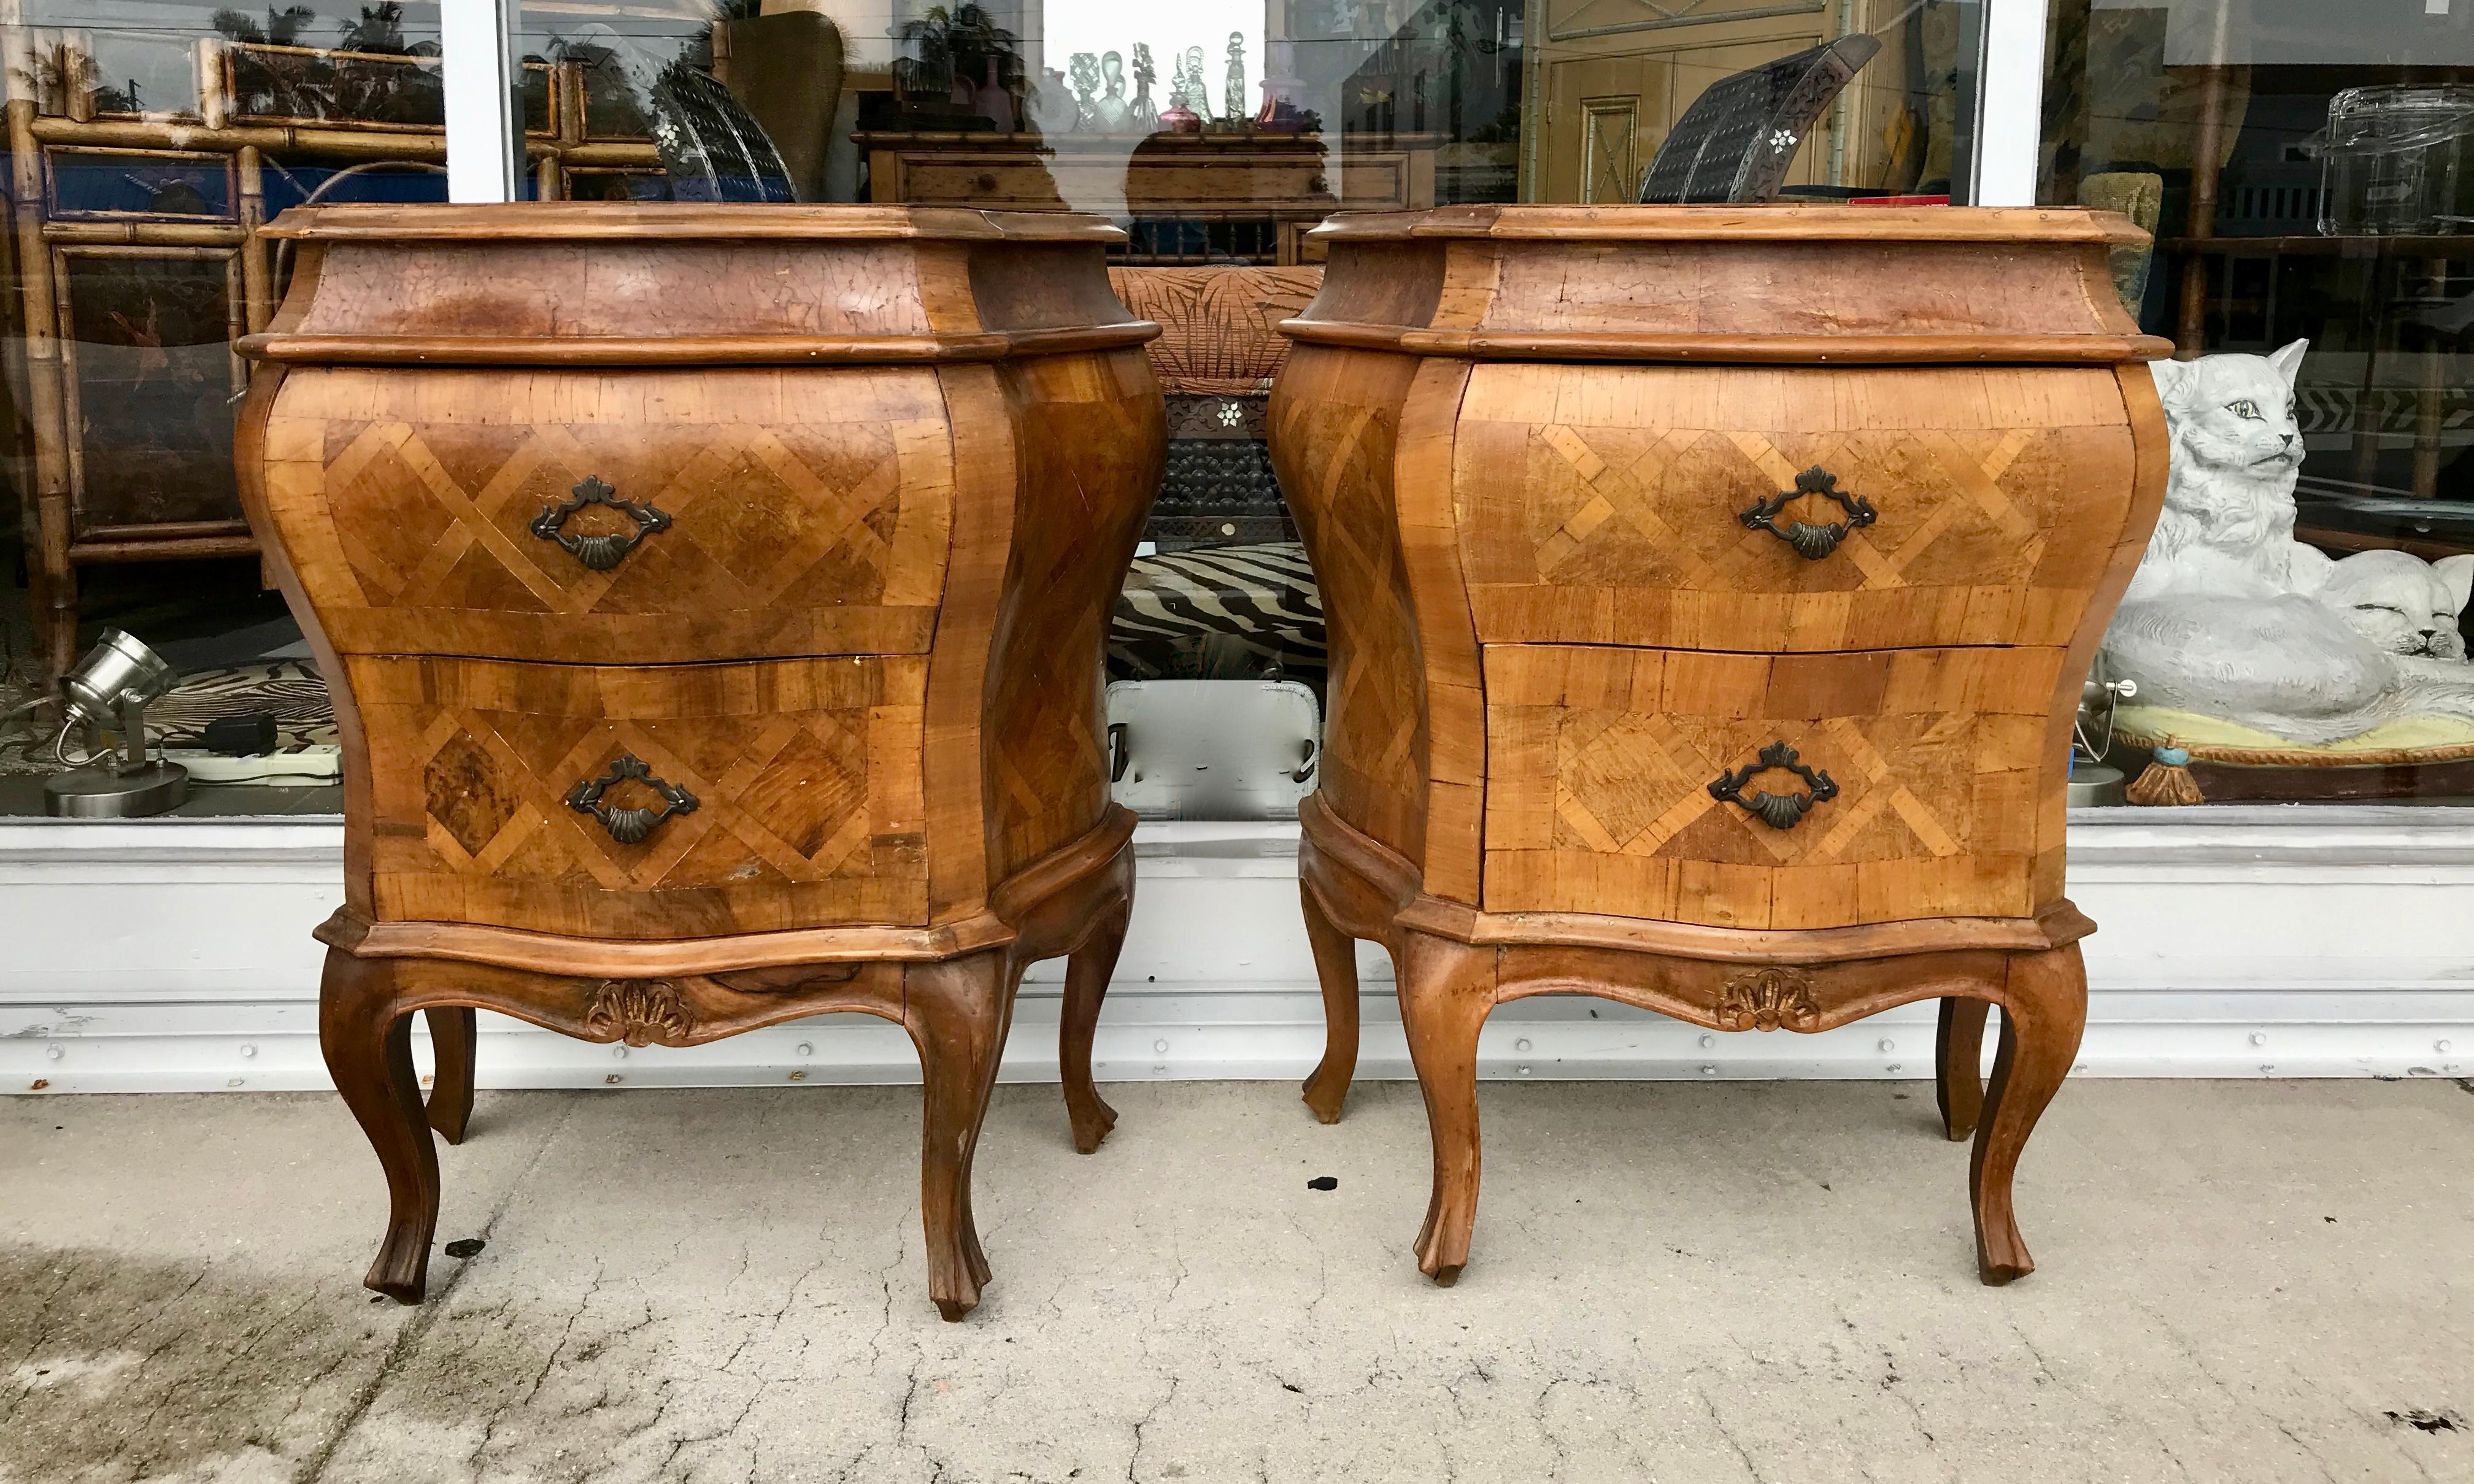 The stunning chests are finished on all 4 sides with outstanding parquetry inlays.
The may be used as night stands as well. They are designed with 2 drawers.
They are outfitted with glass tops.